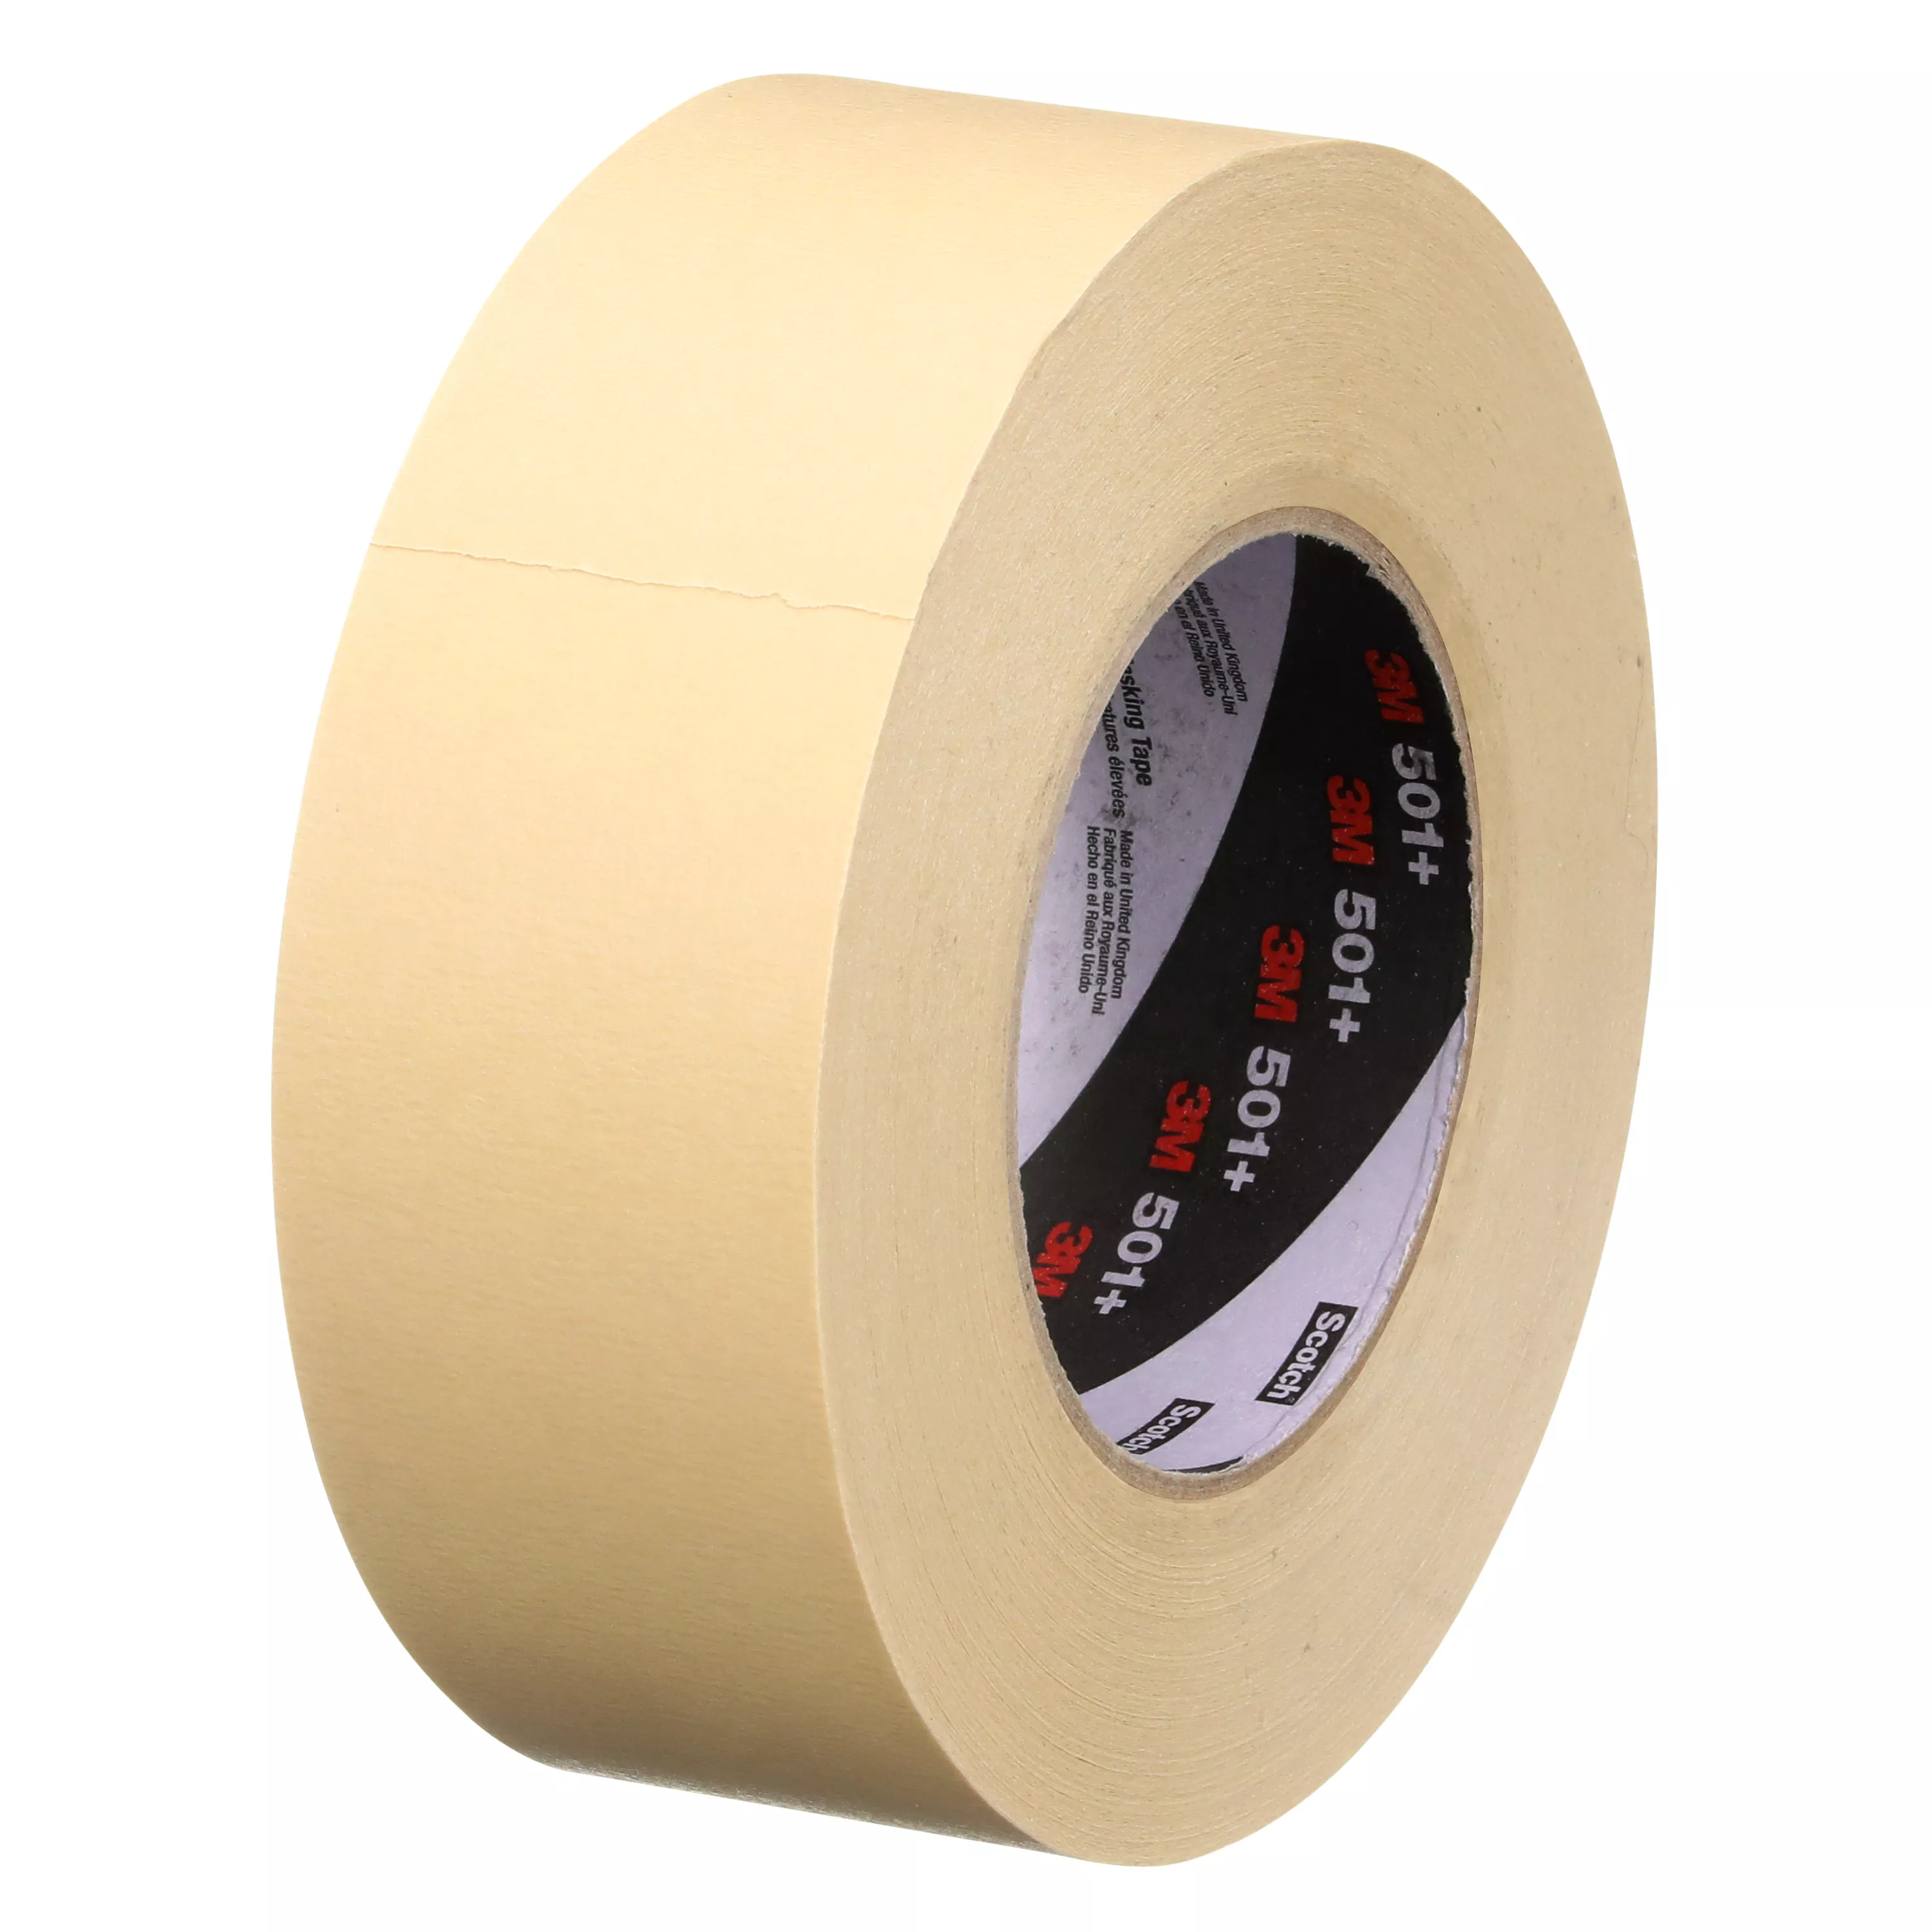 3M™ Specialty High Temperature Masking Tape 501+, Tan, 48 mm x 55 m, 7.3
mil, 24 Rolls/Case